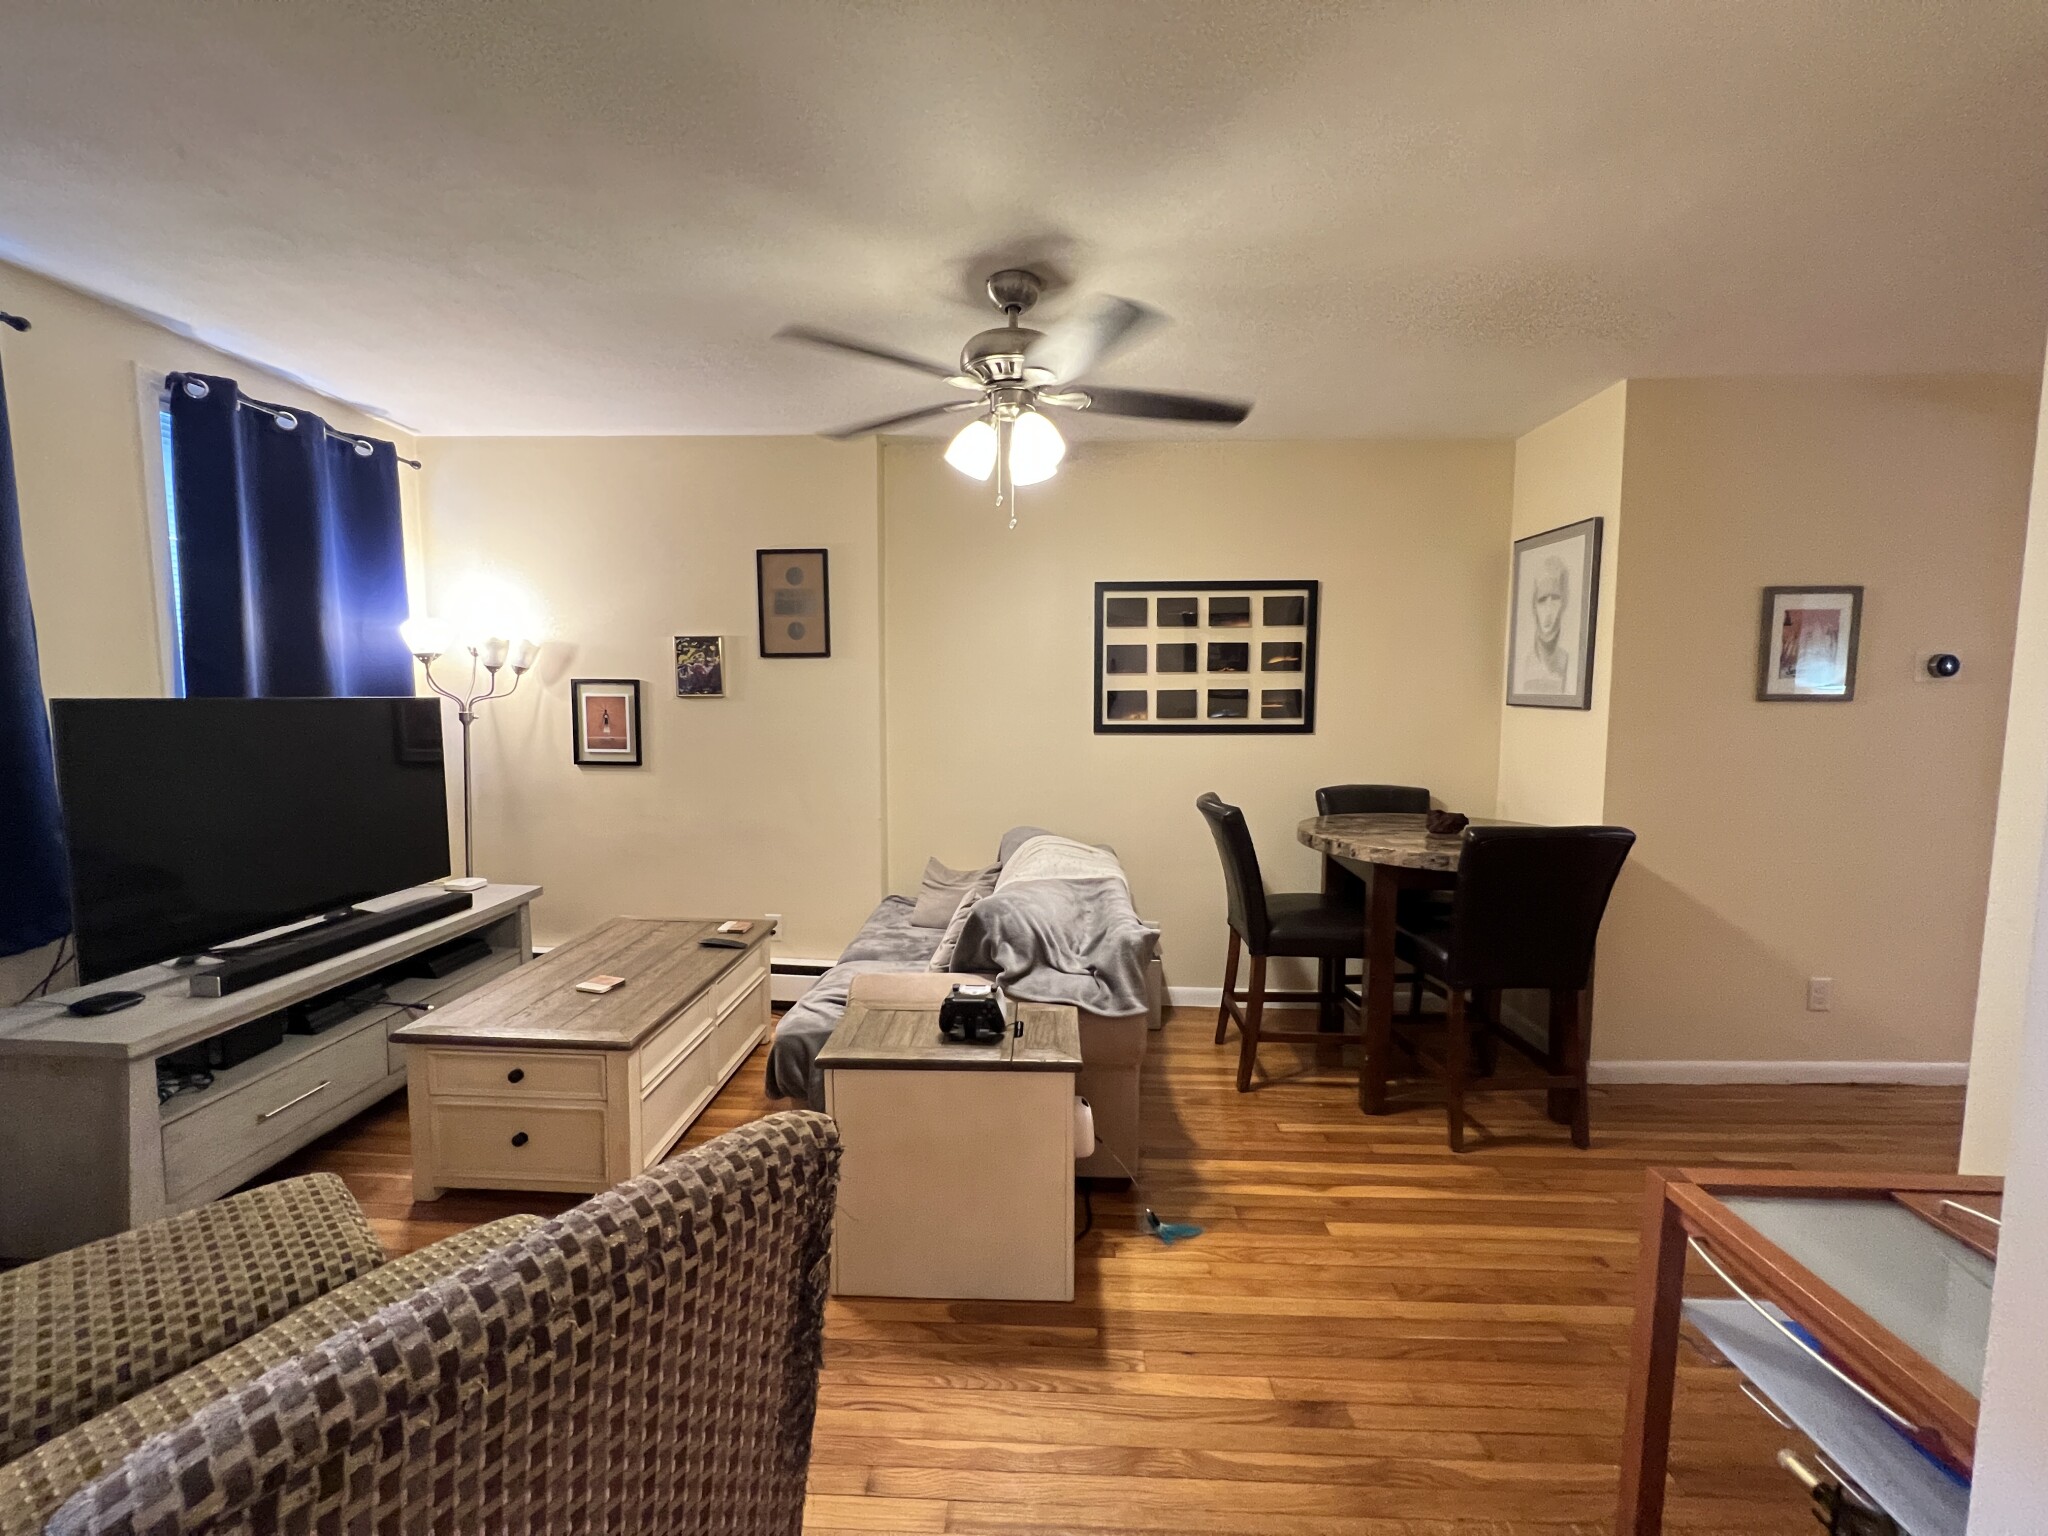 Photos of apartment on Foley St.,Somerville MA 02145